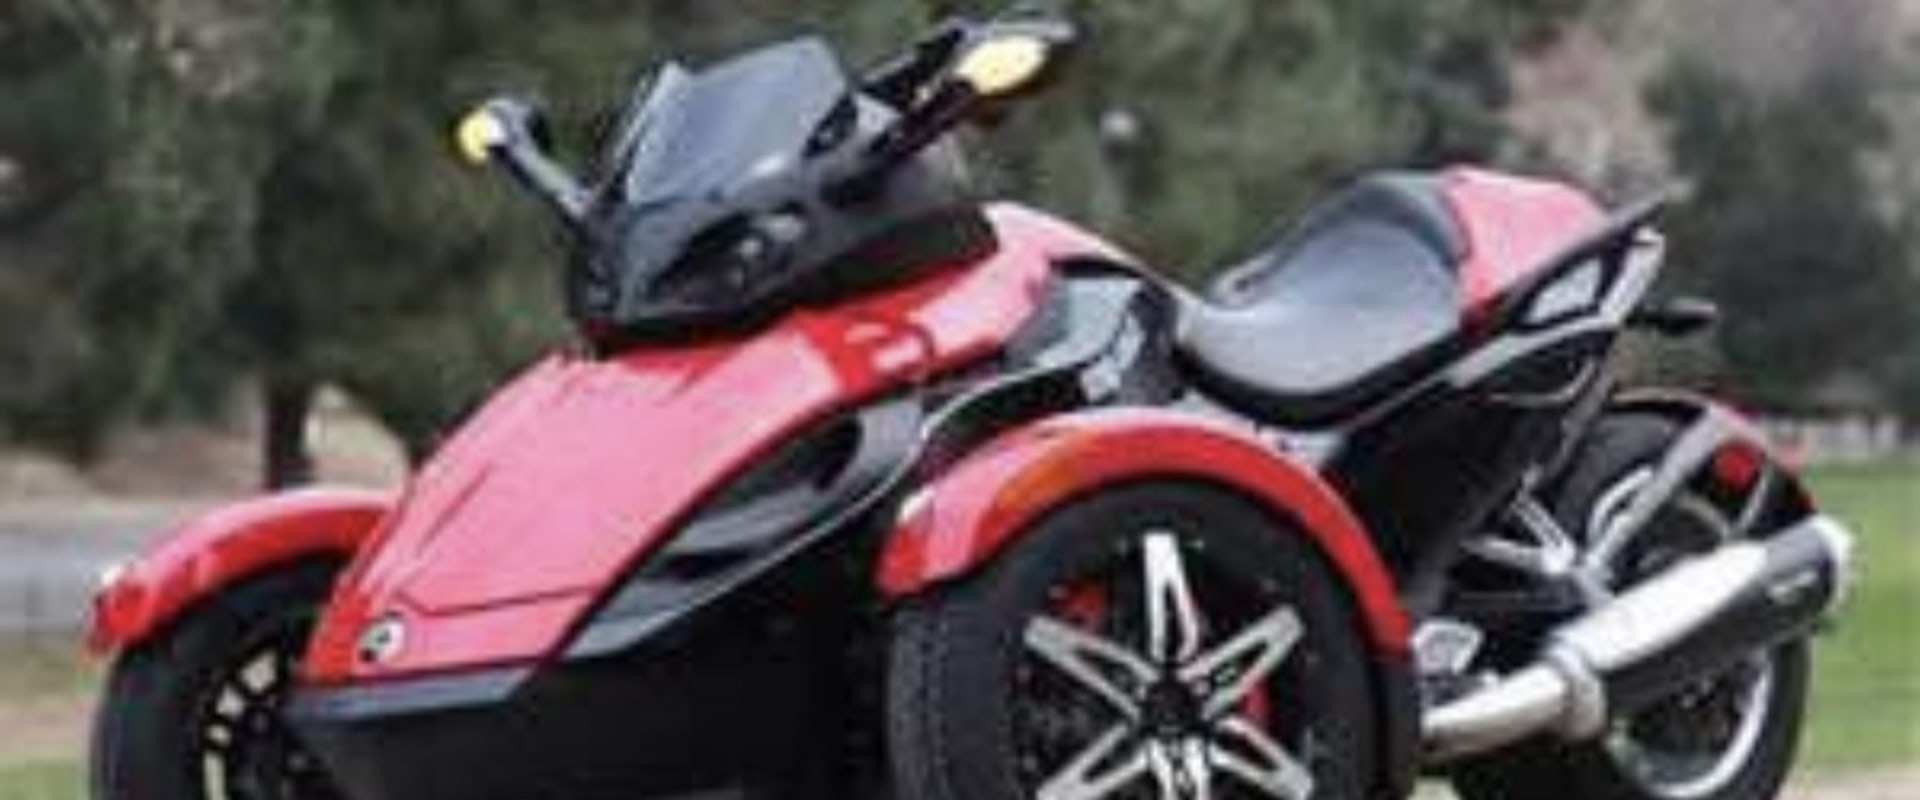 AutoCycle Insurance for a New Motorcycle